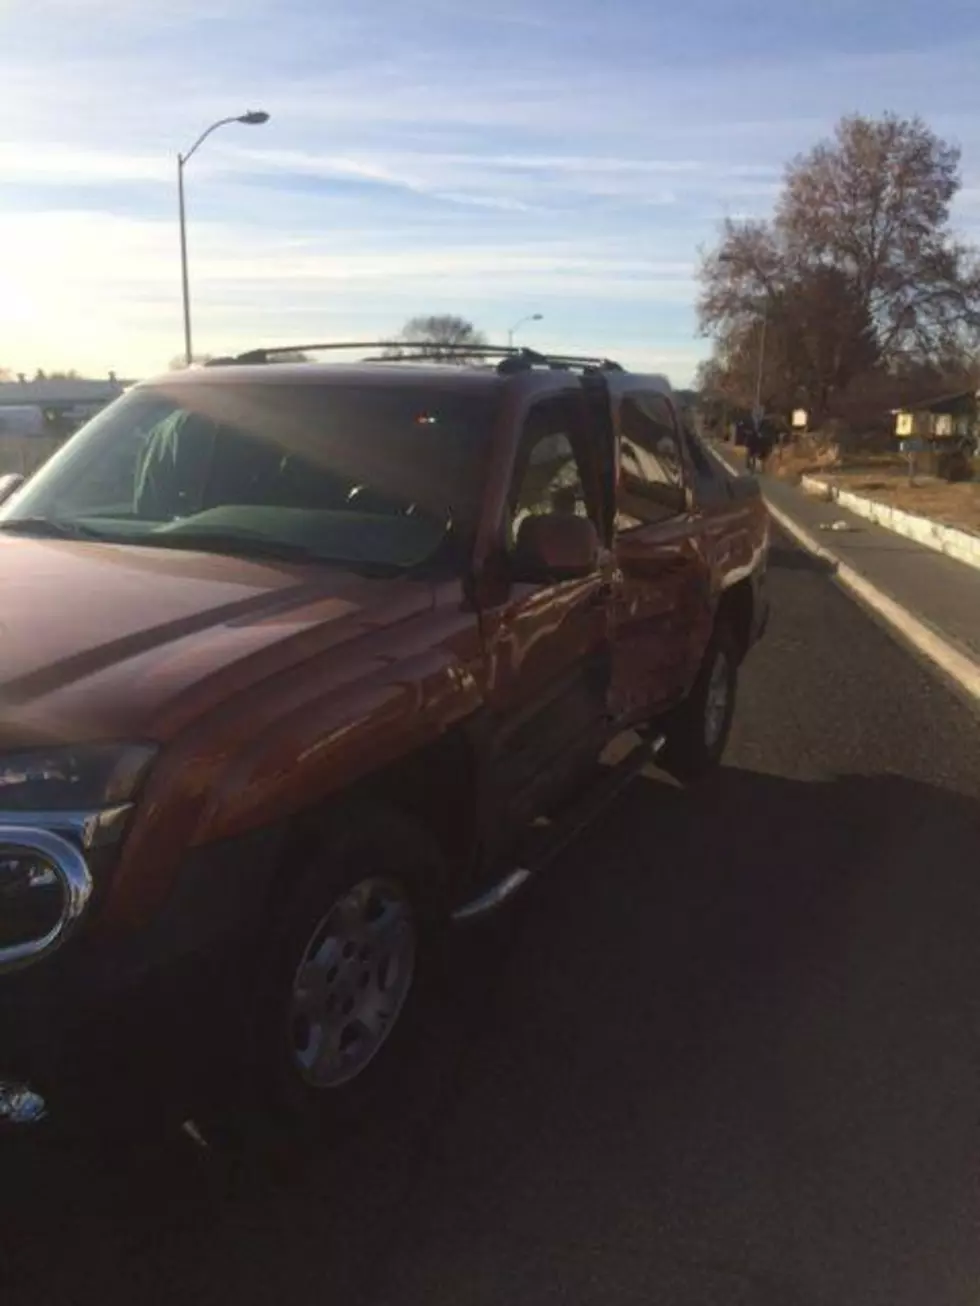 Another Failure to Yield Crash Wipes Out Vehicles in Kennewick